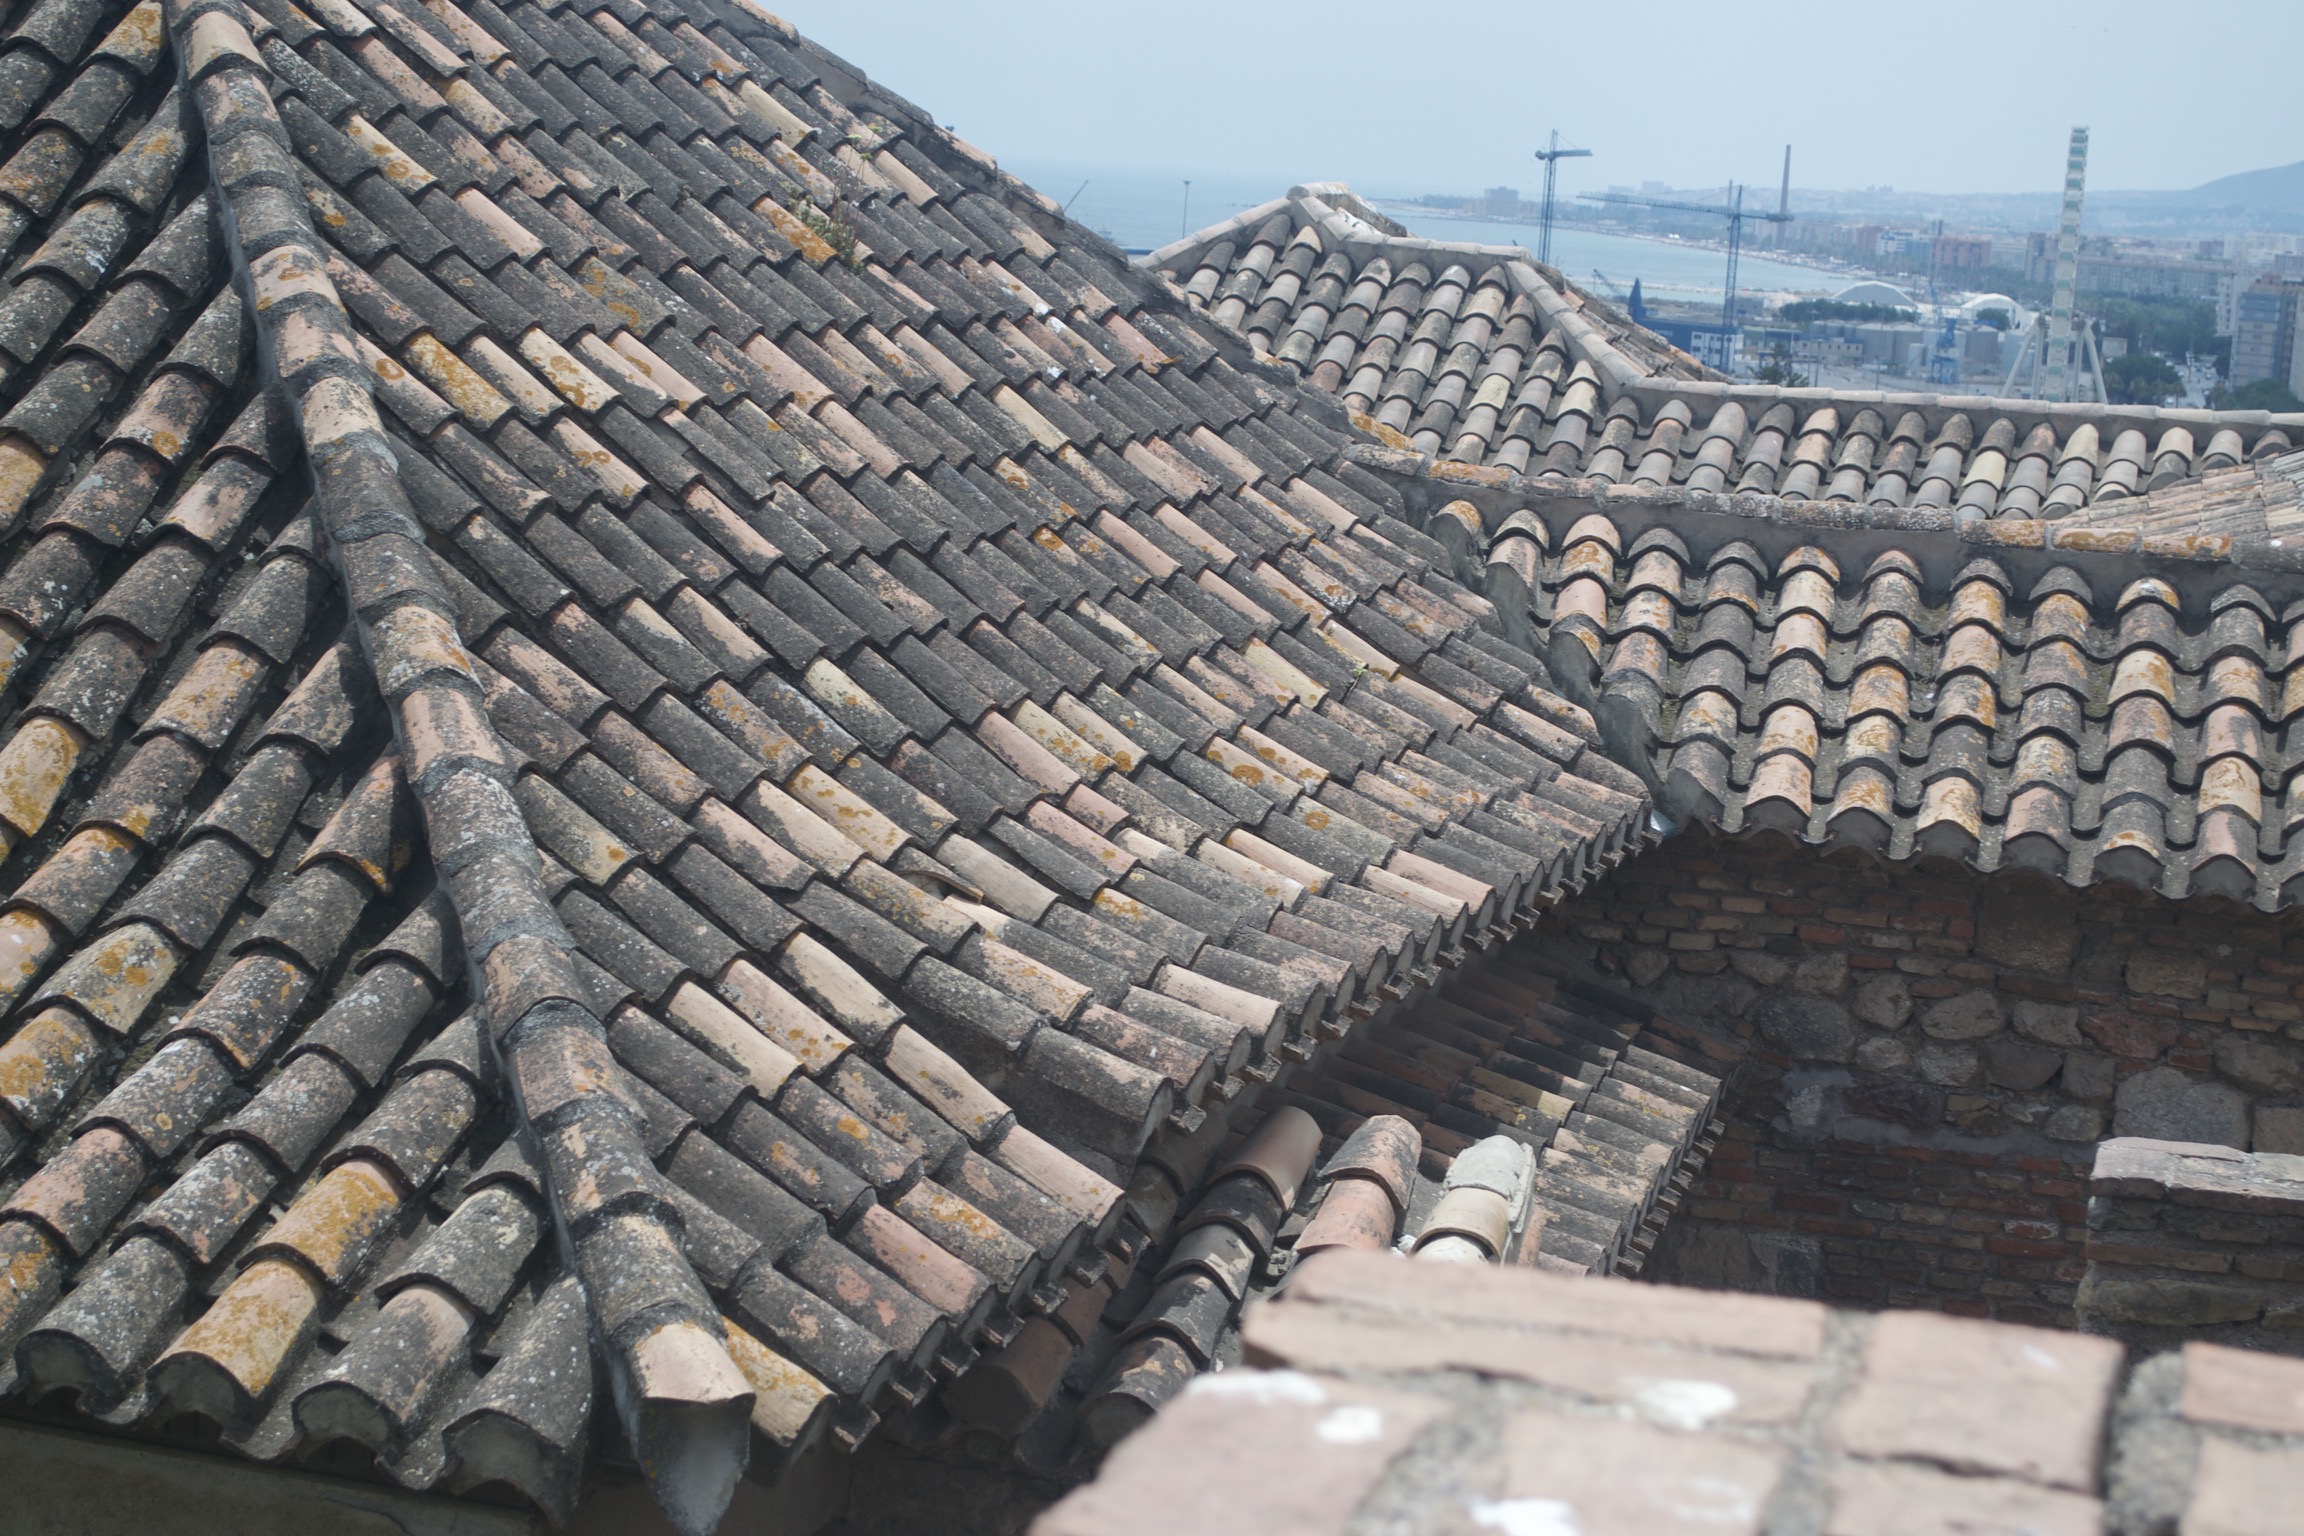 Tiled roofs meet, yielding complicated joints and eaves.